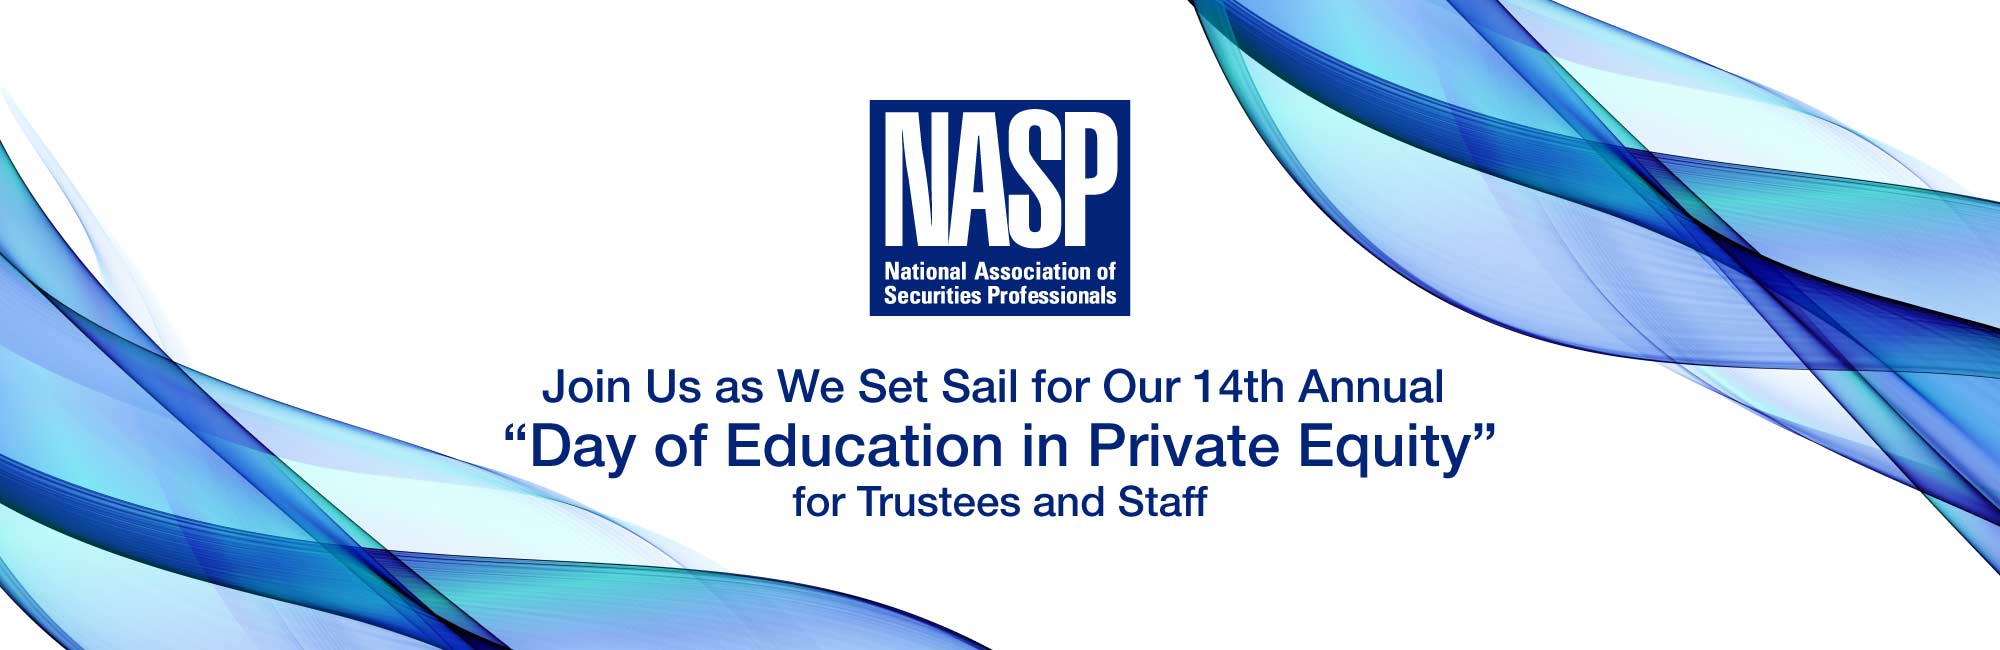 Join Us as We Set Sail for Our 14th Annual Day of Education in Private Equity for Trustees and Staff